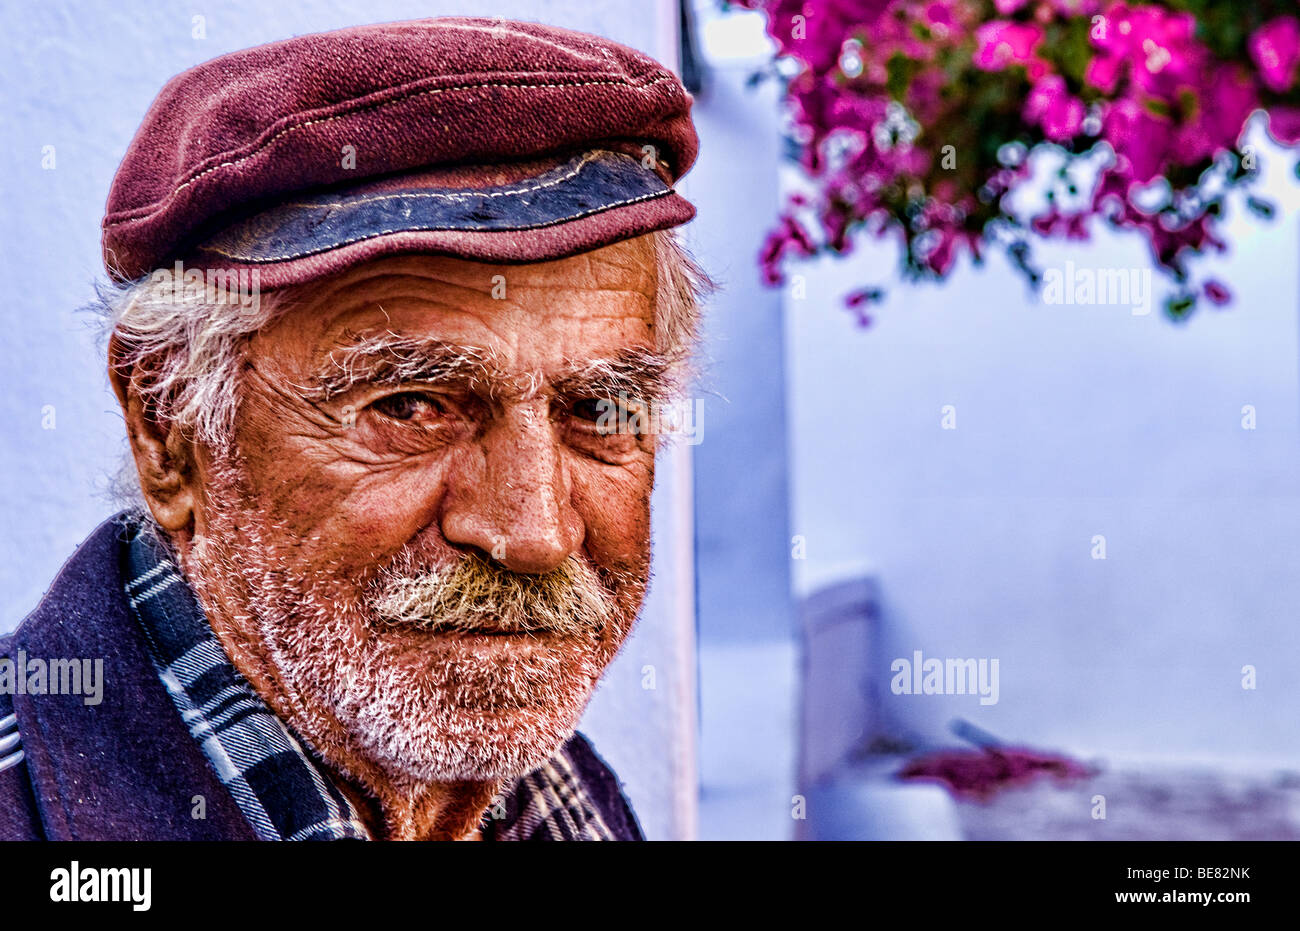 https://c8.alamy.com/comp/BE82NK/beautiful-village-of-oia-with-old-local-man-in-greek-cap-in-santorini-BE82NK.jpg